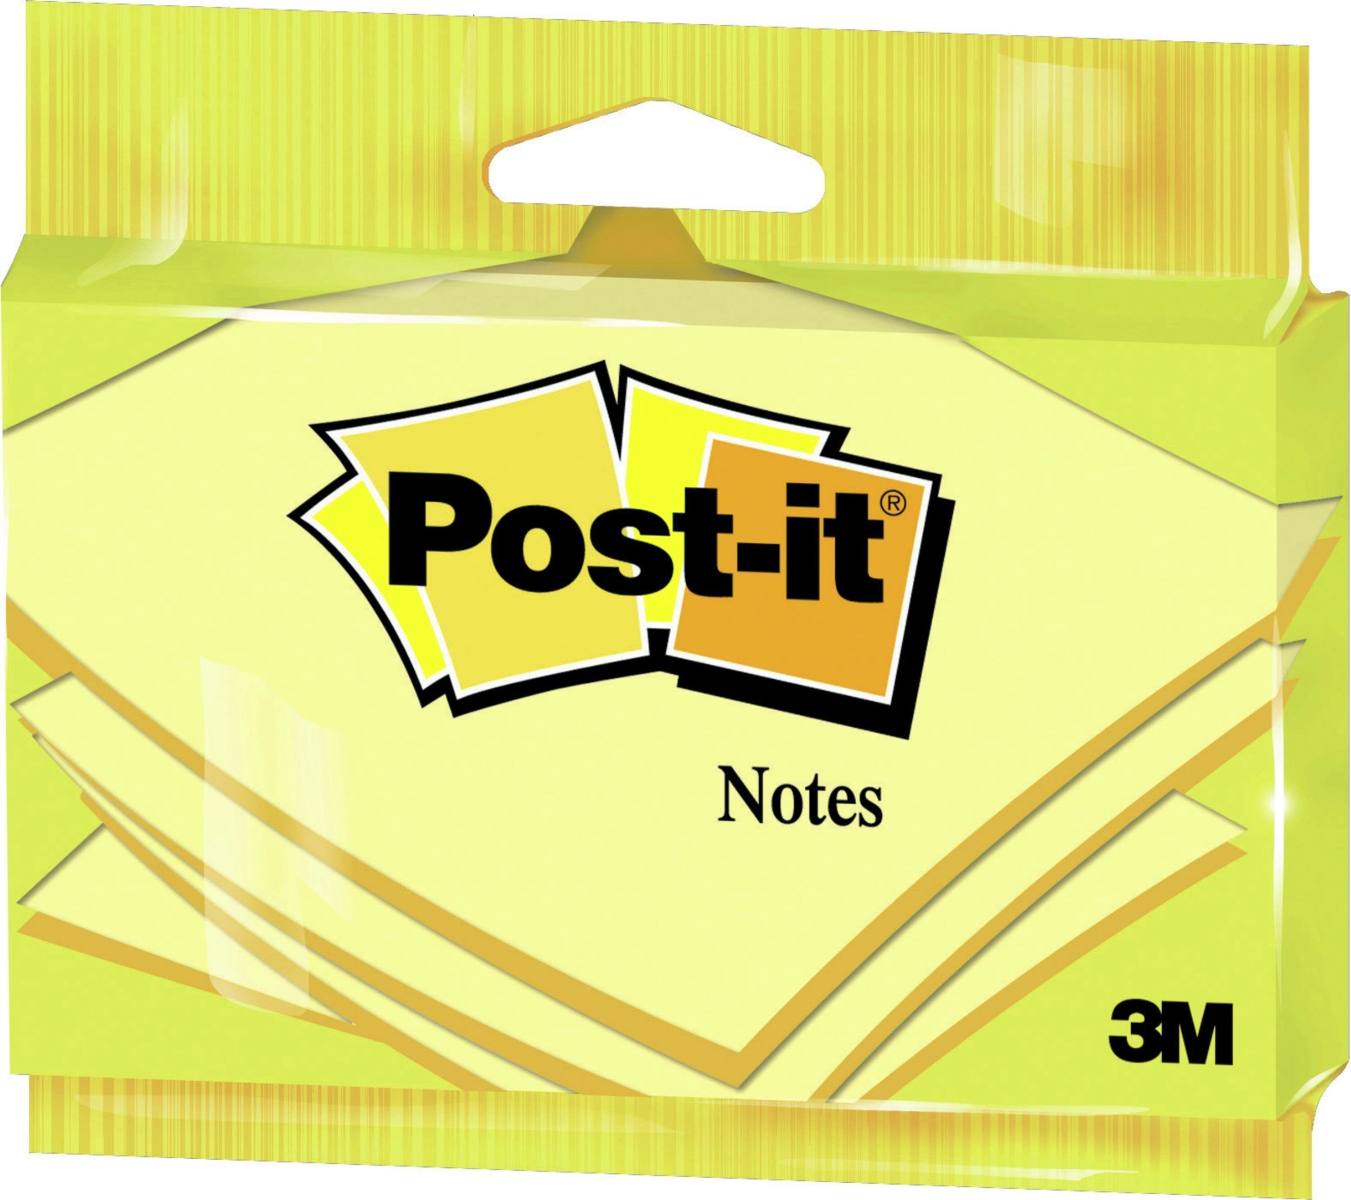 3M Post-it Notes 6830GB, 127 mm x 76 mm, yellow, 1 pad of 100 sheets